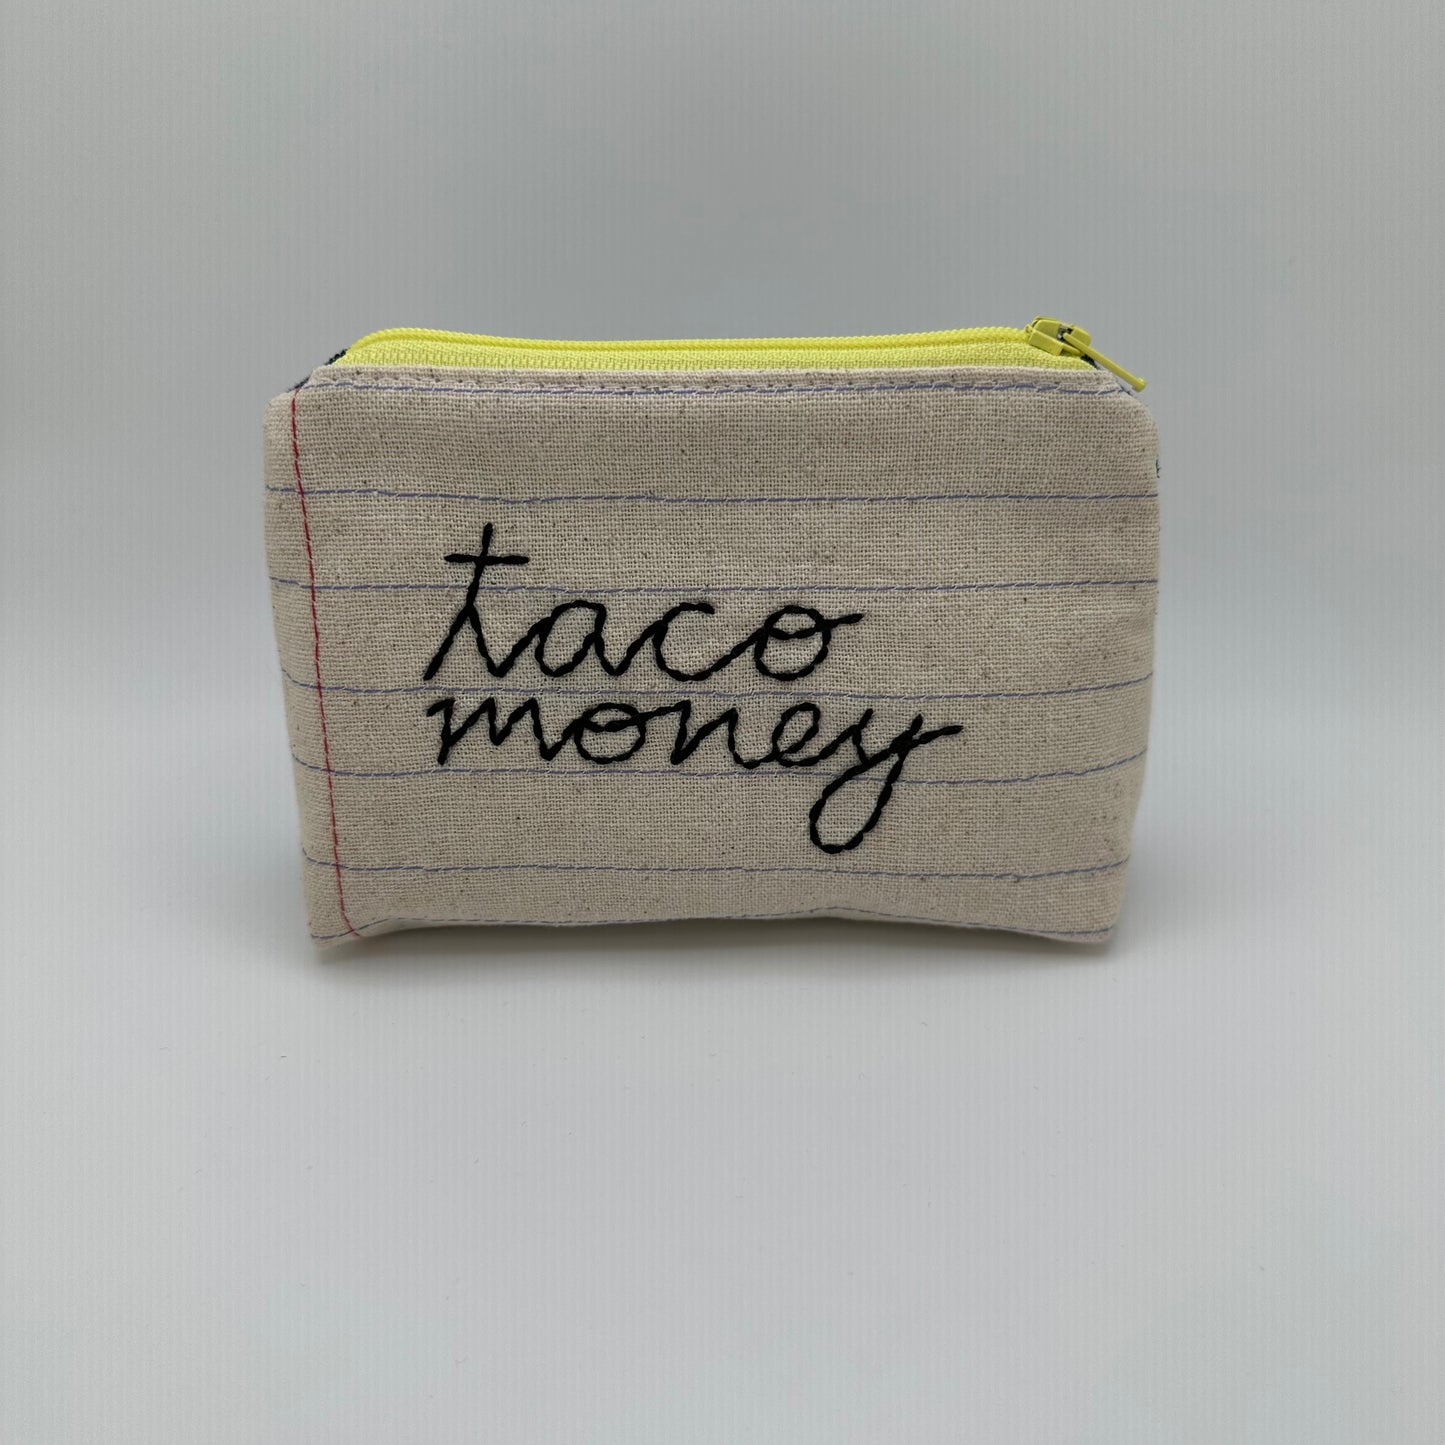 Handmade pouch sewn with the words "taco money"